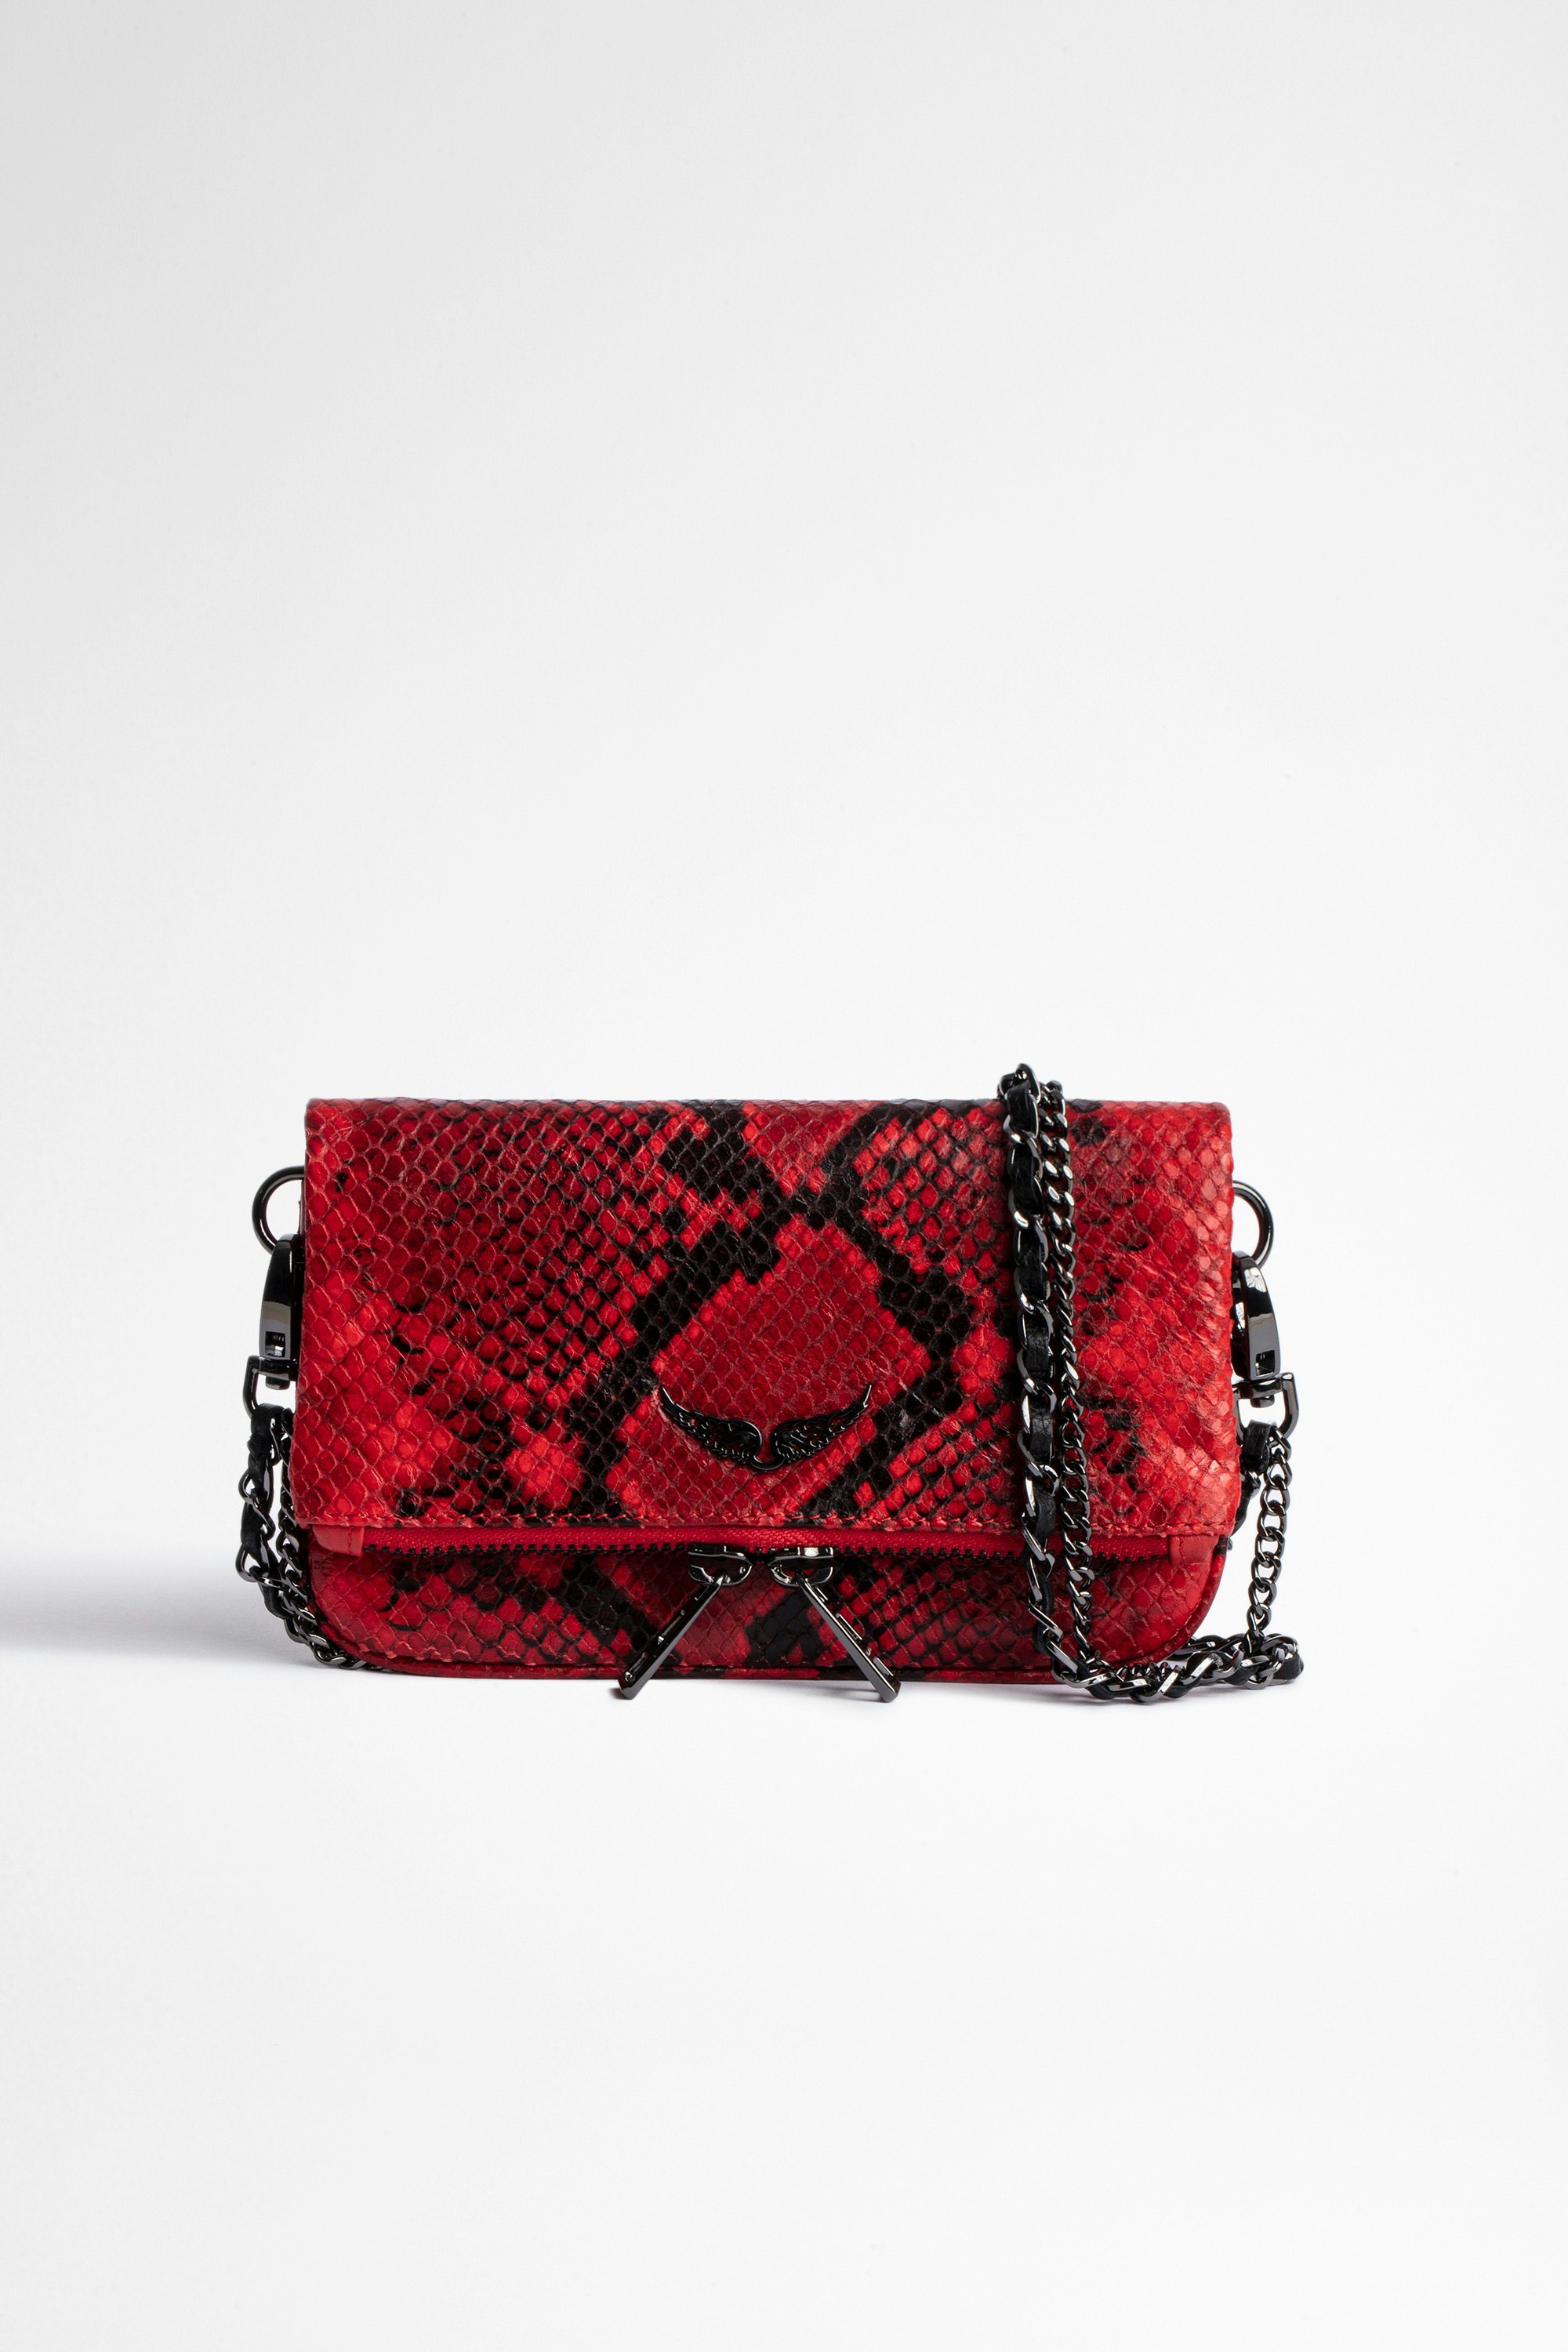 Rock Nano Clutch Women's red leather clutch bag with snakeskin effect